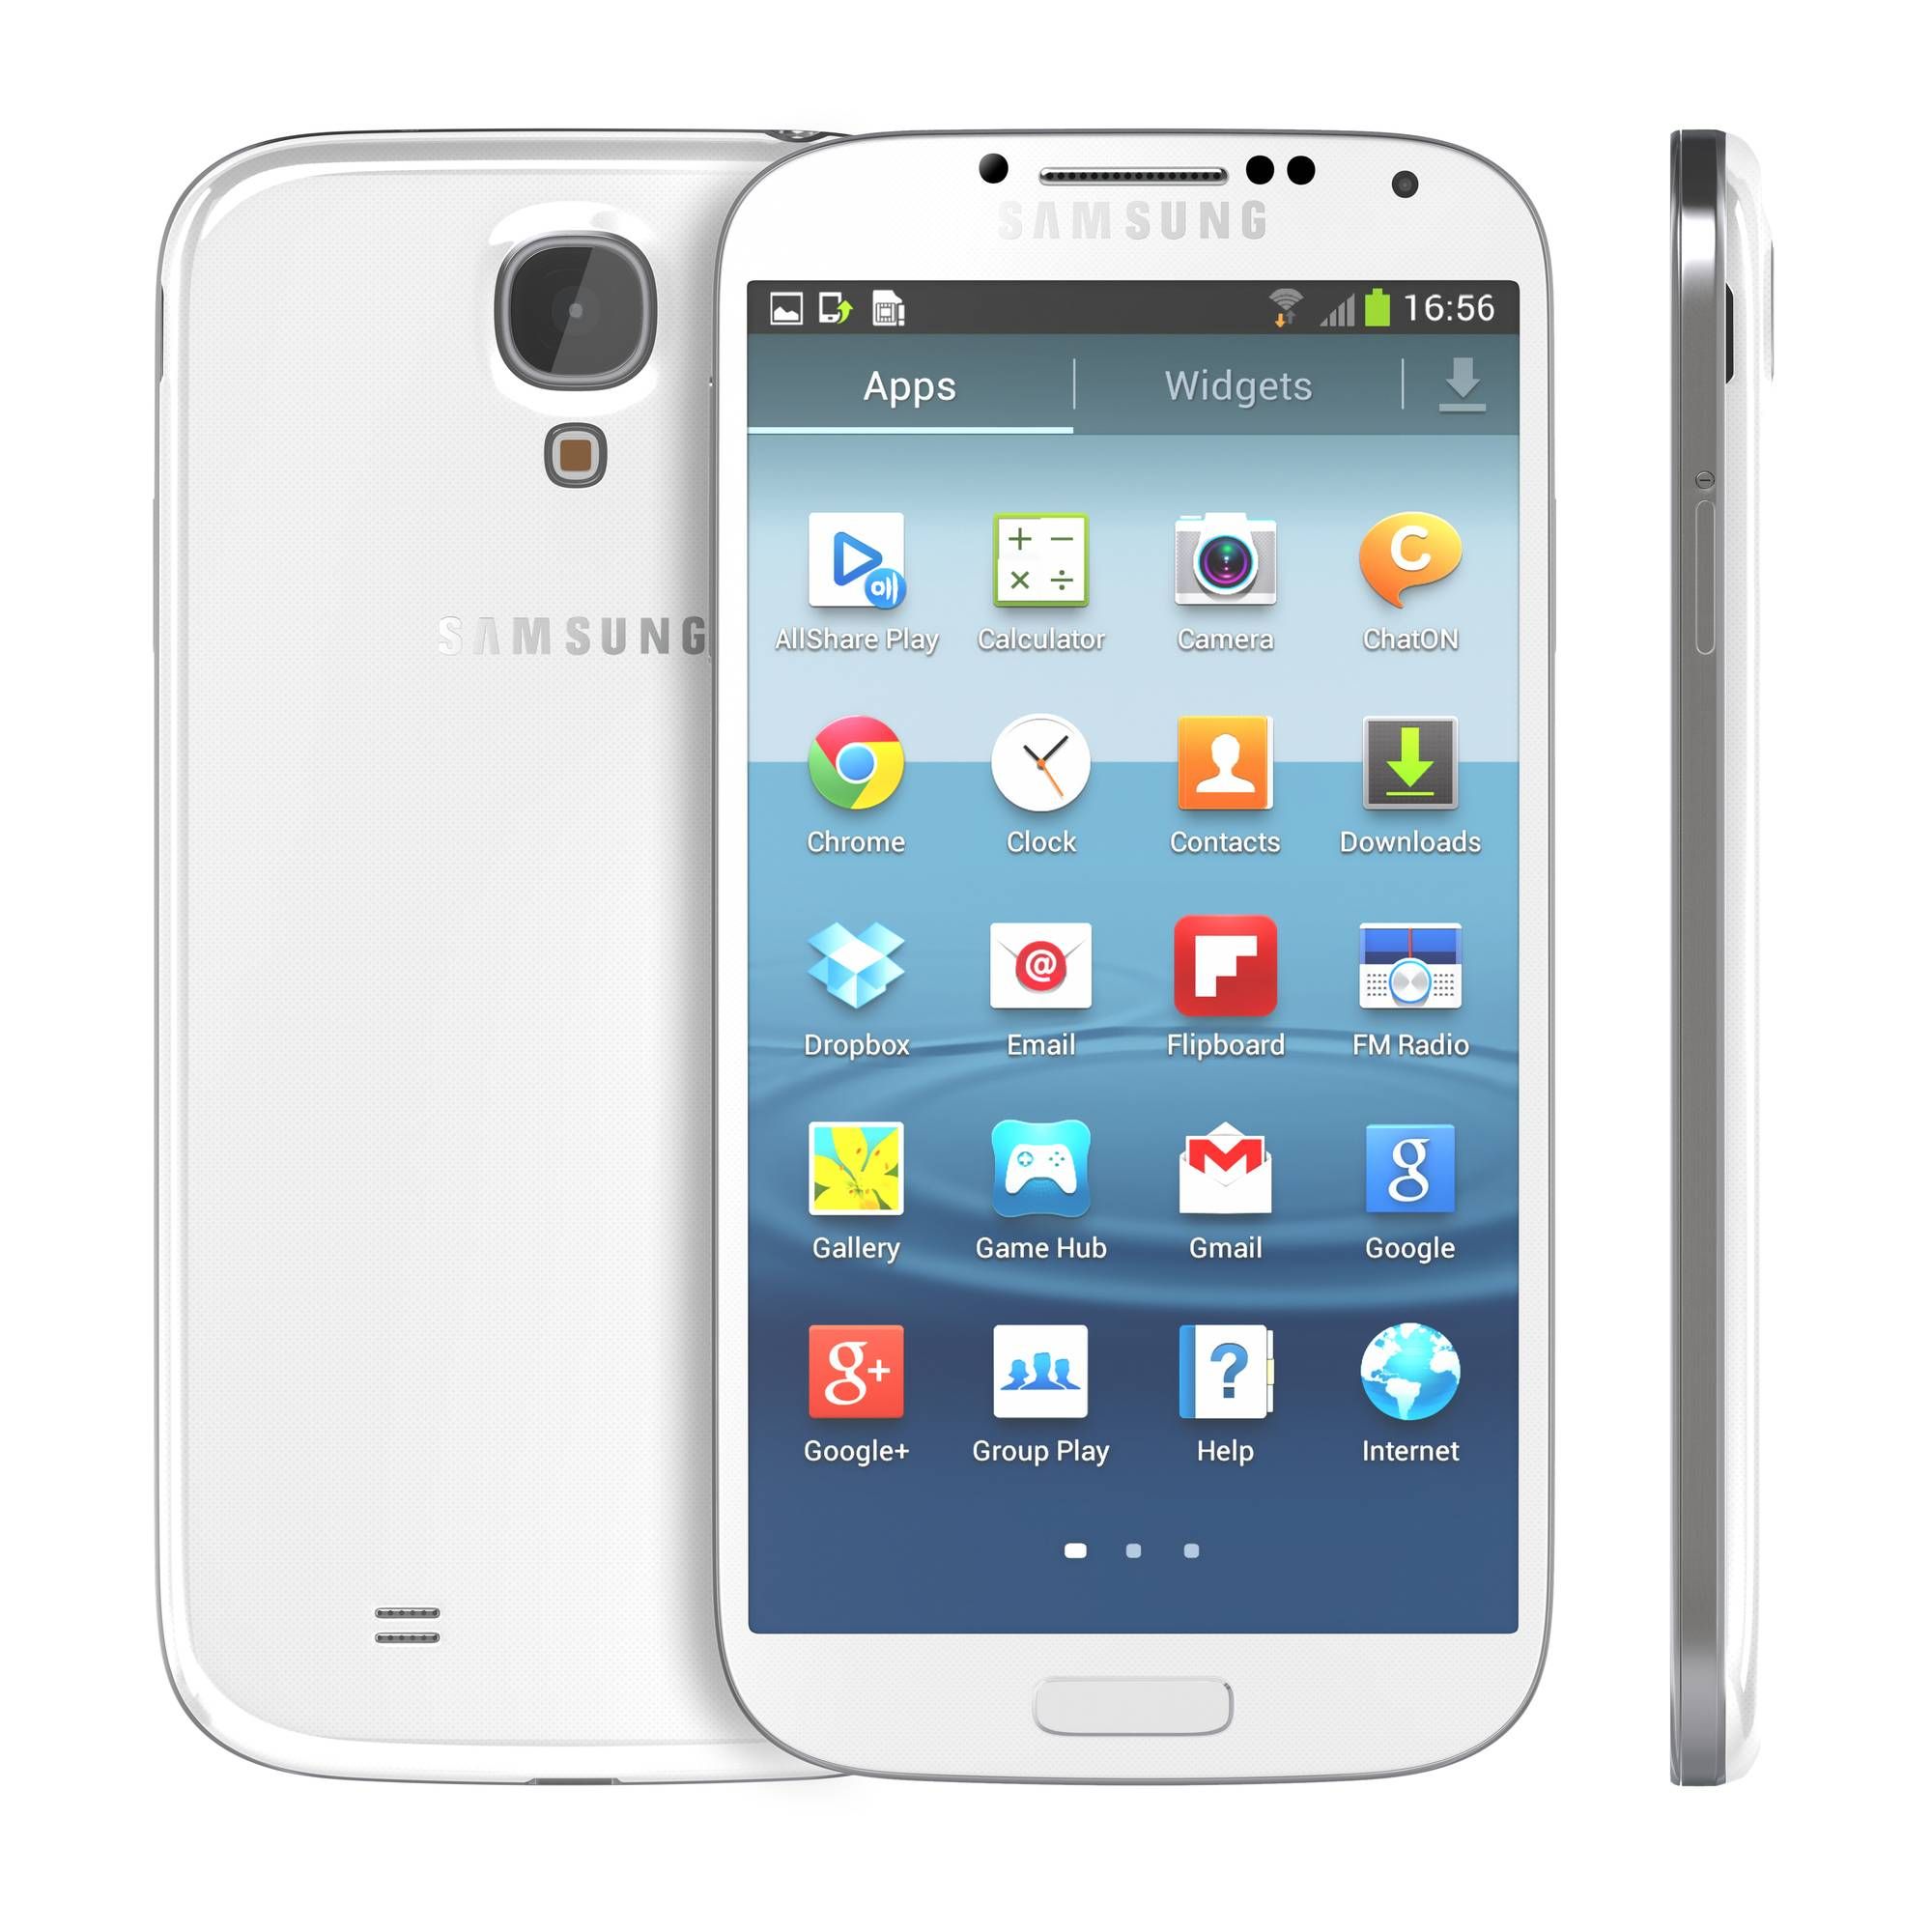 Galaxy S4 smartphone speed was allegedly exaggerated by the company.